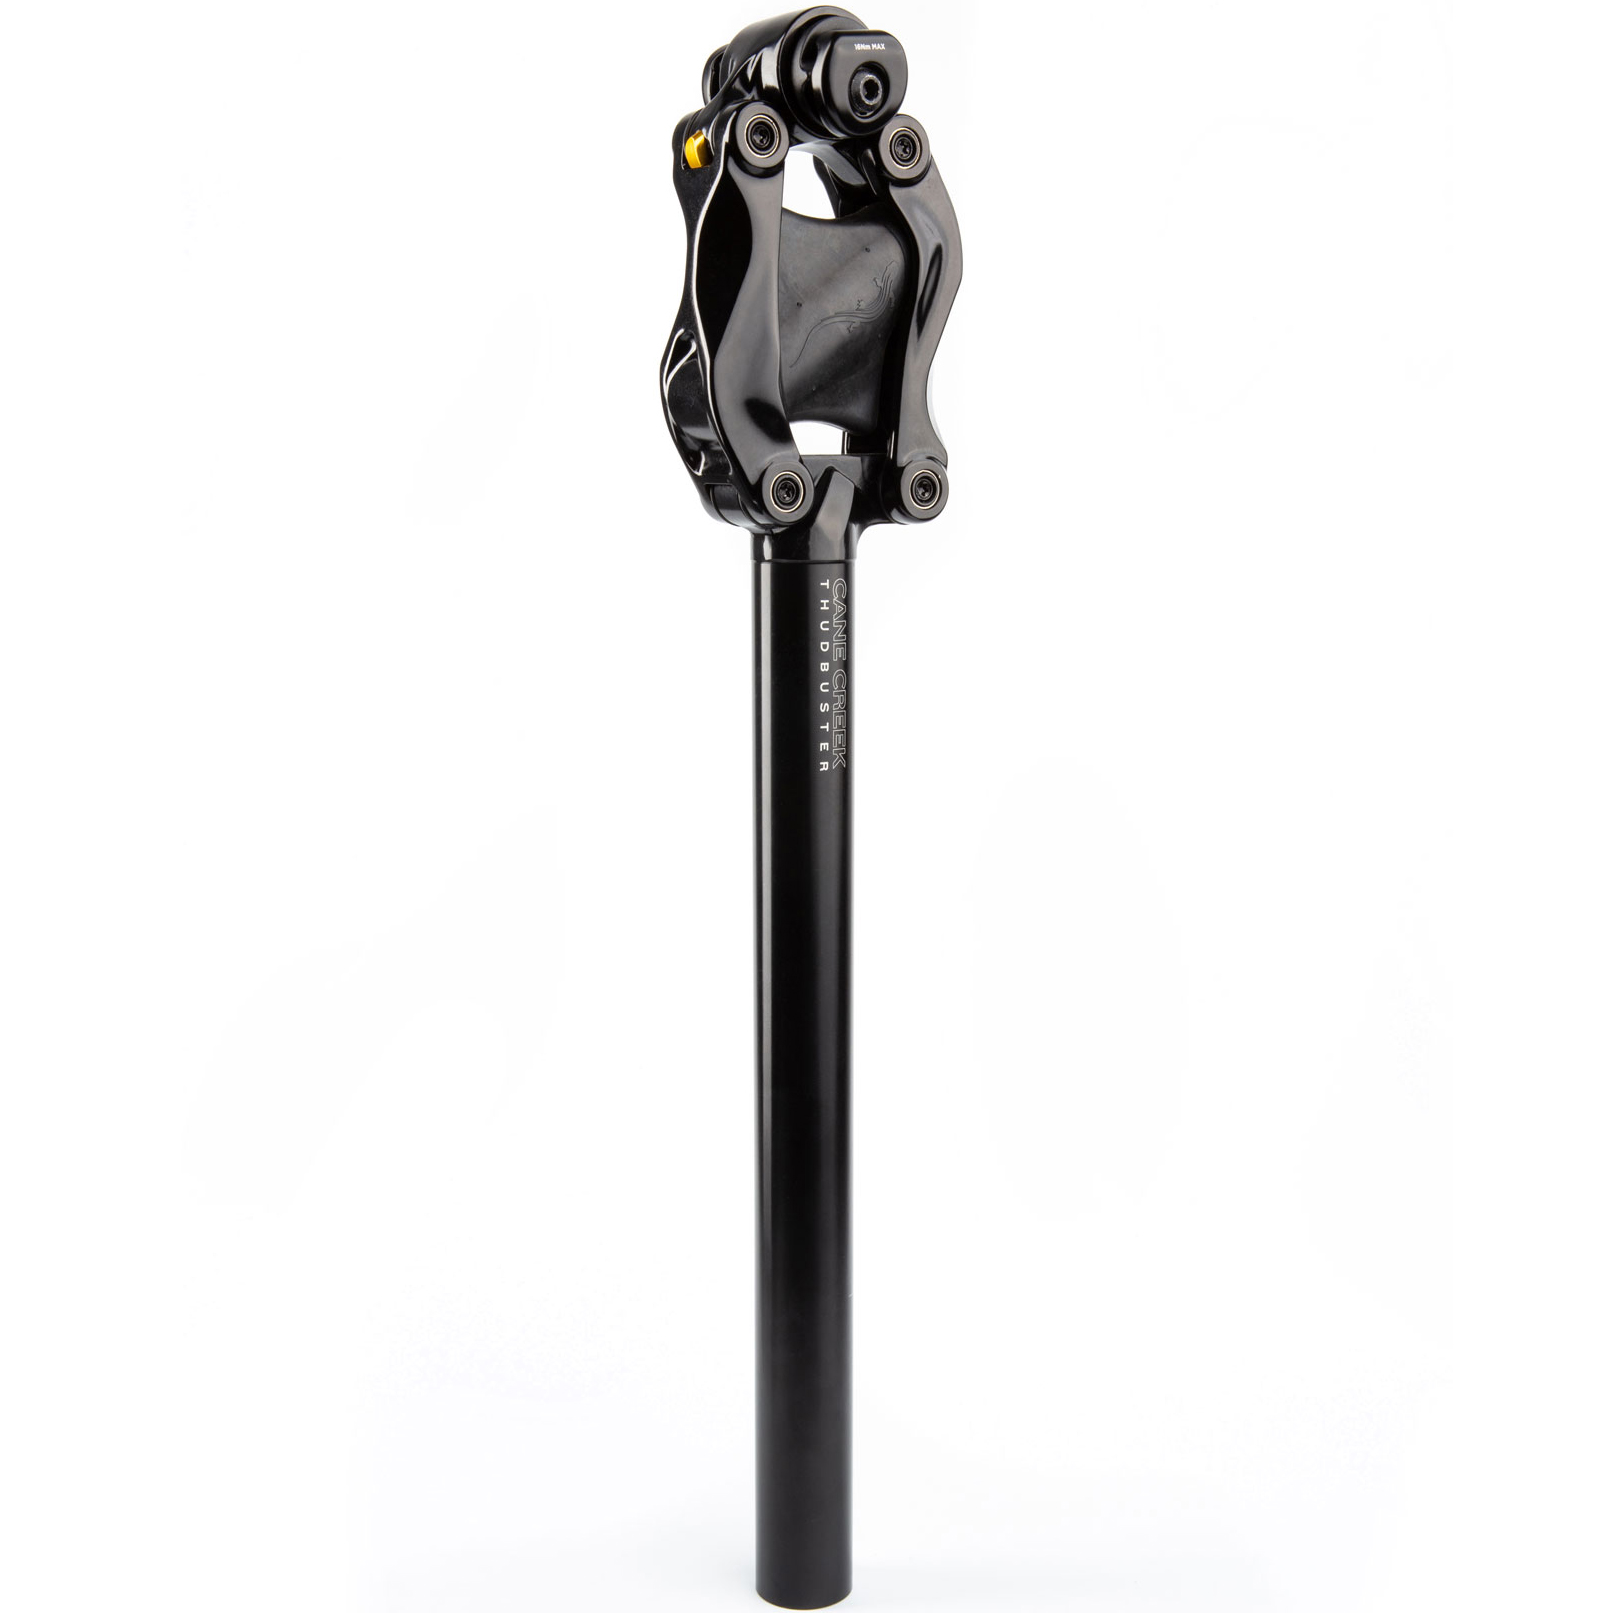 Picture of Cane Creek Thudbuster G4 LT Seatpost - 390mm - Ø 27.2 mm